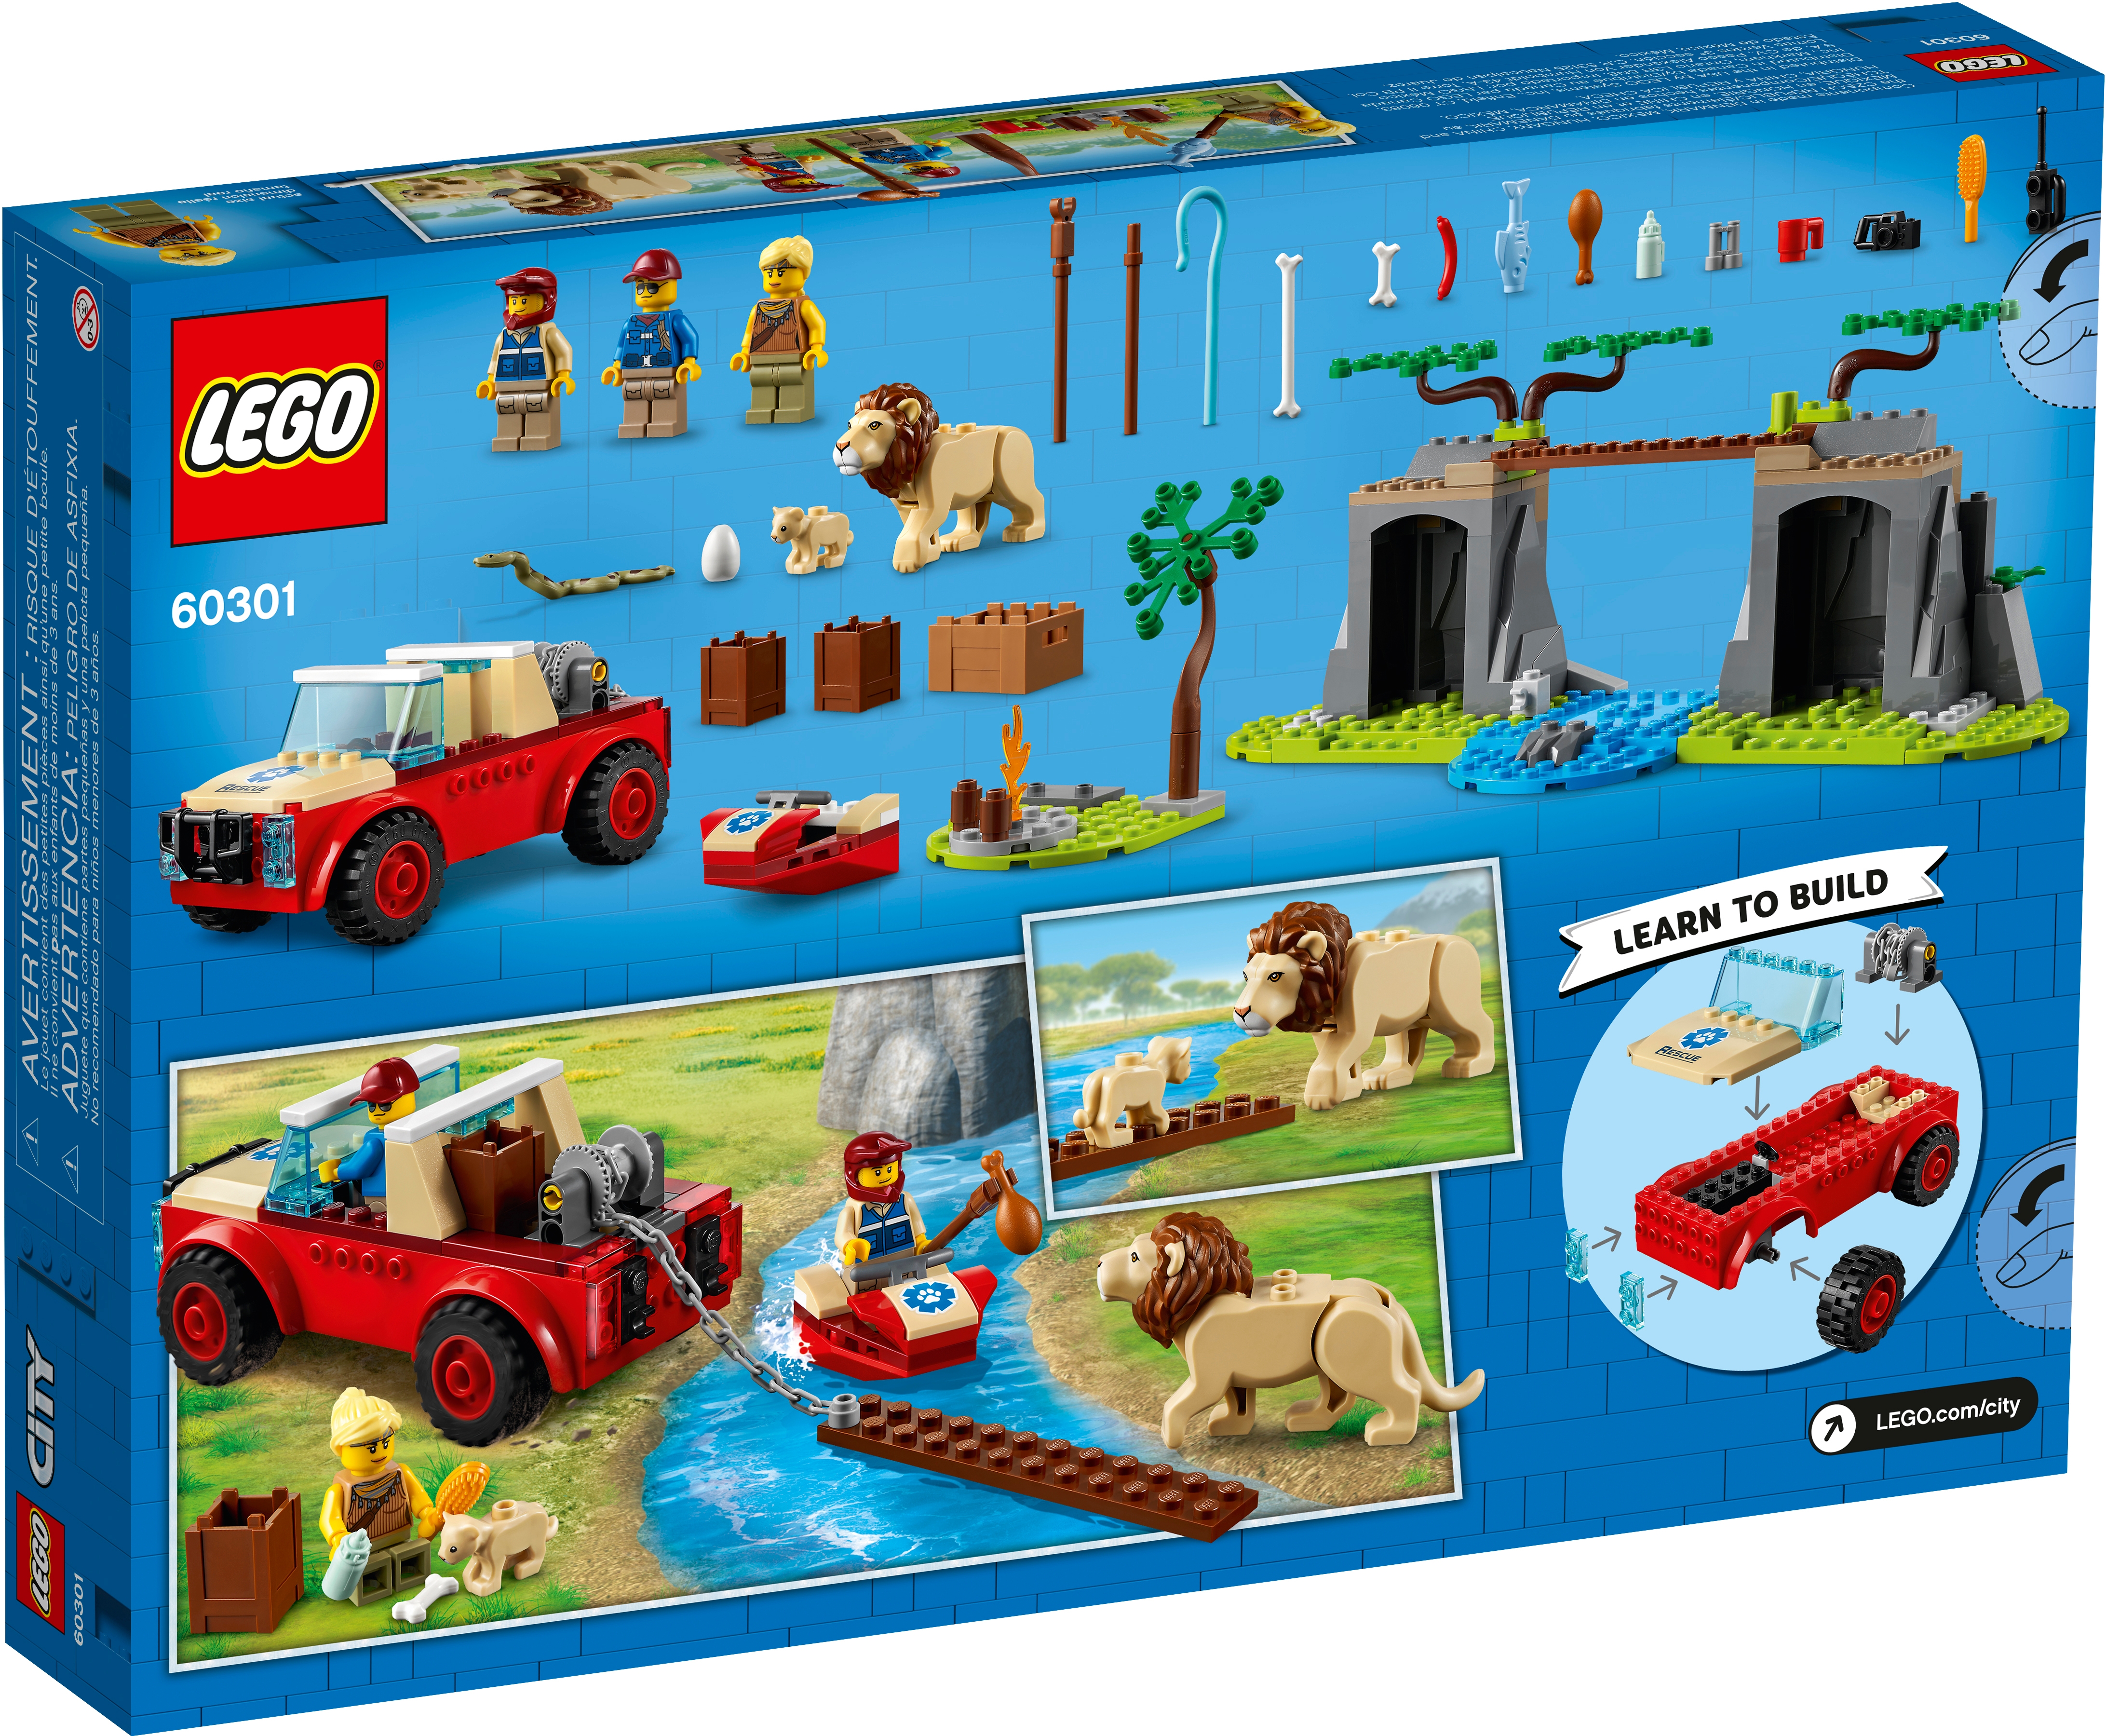 Building Set with Animal Figures LEGO 60301 City Wildlife Rescue Off Roader Vehicle Car Toy Years Old Gift Idea for Preschool Kids 4